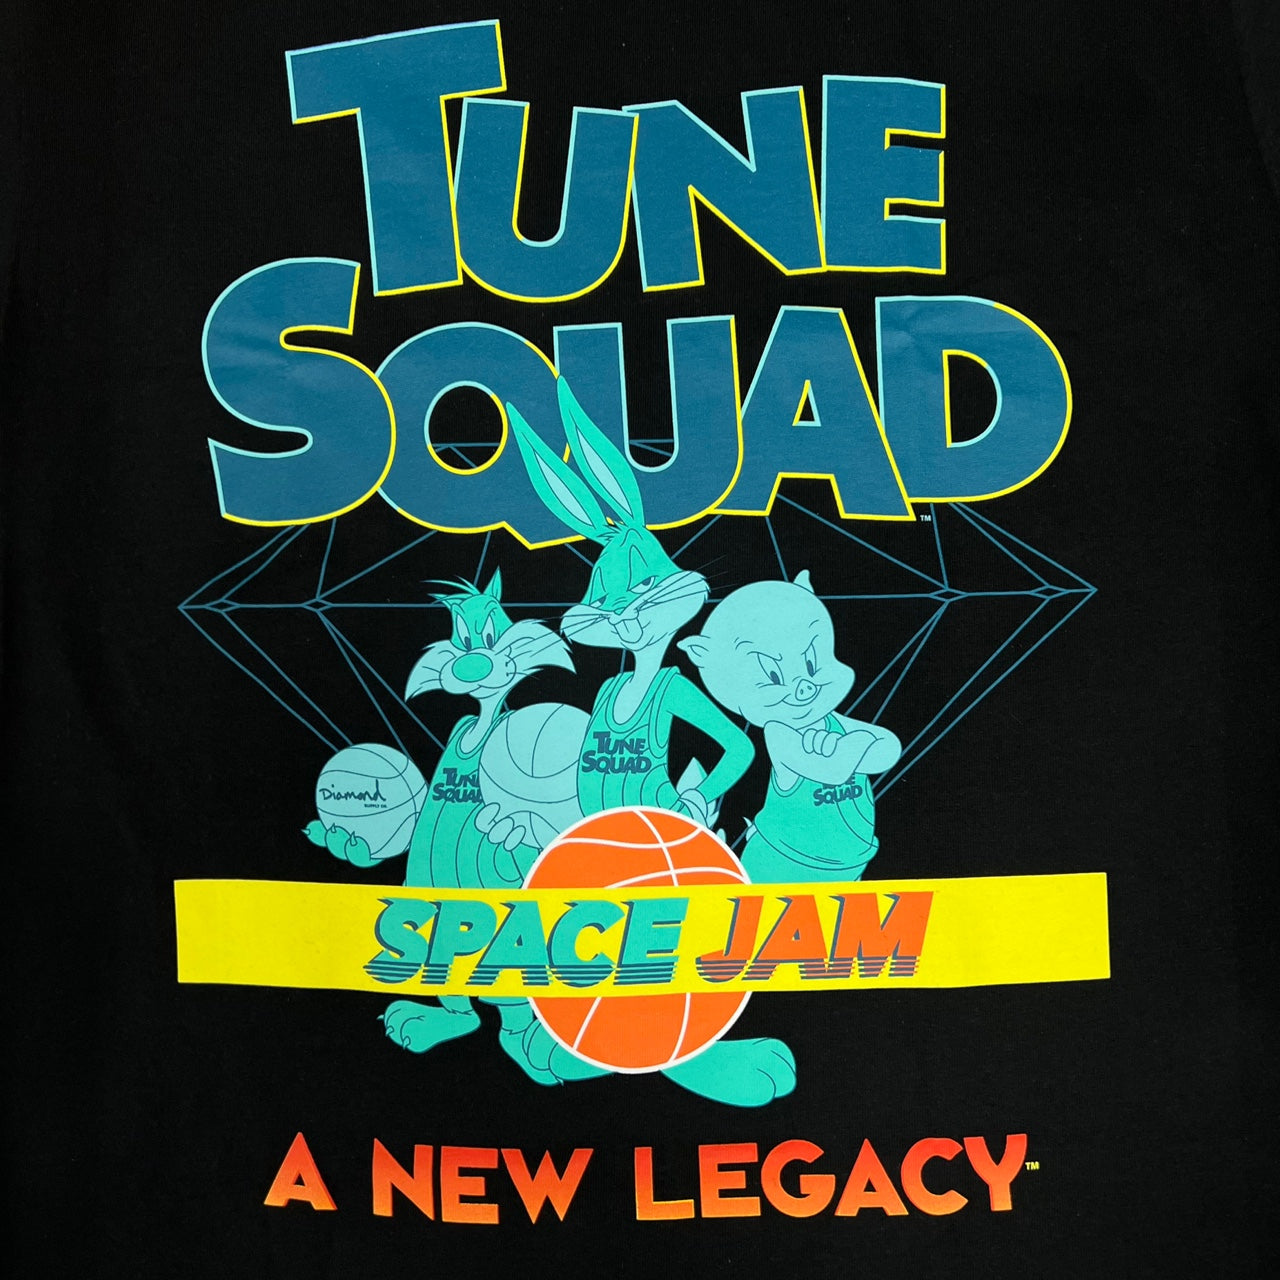 Diamond Supply Co. Tune Squad 3 to 3 New Legacy T-Shirt